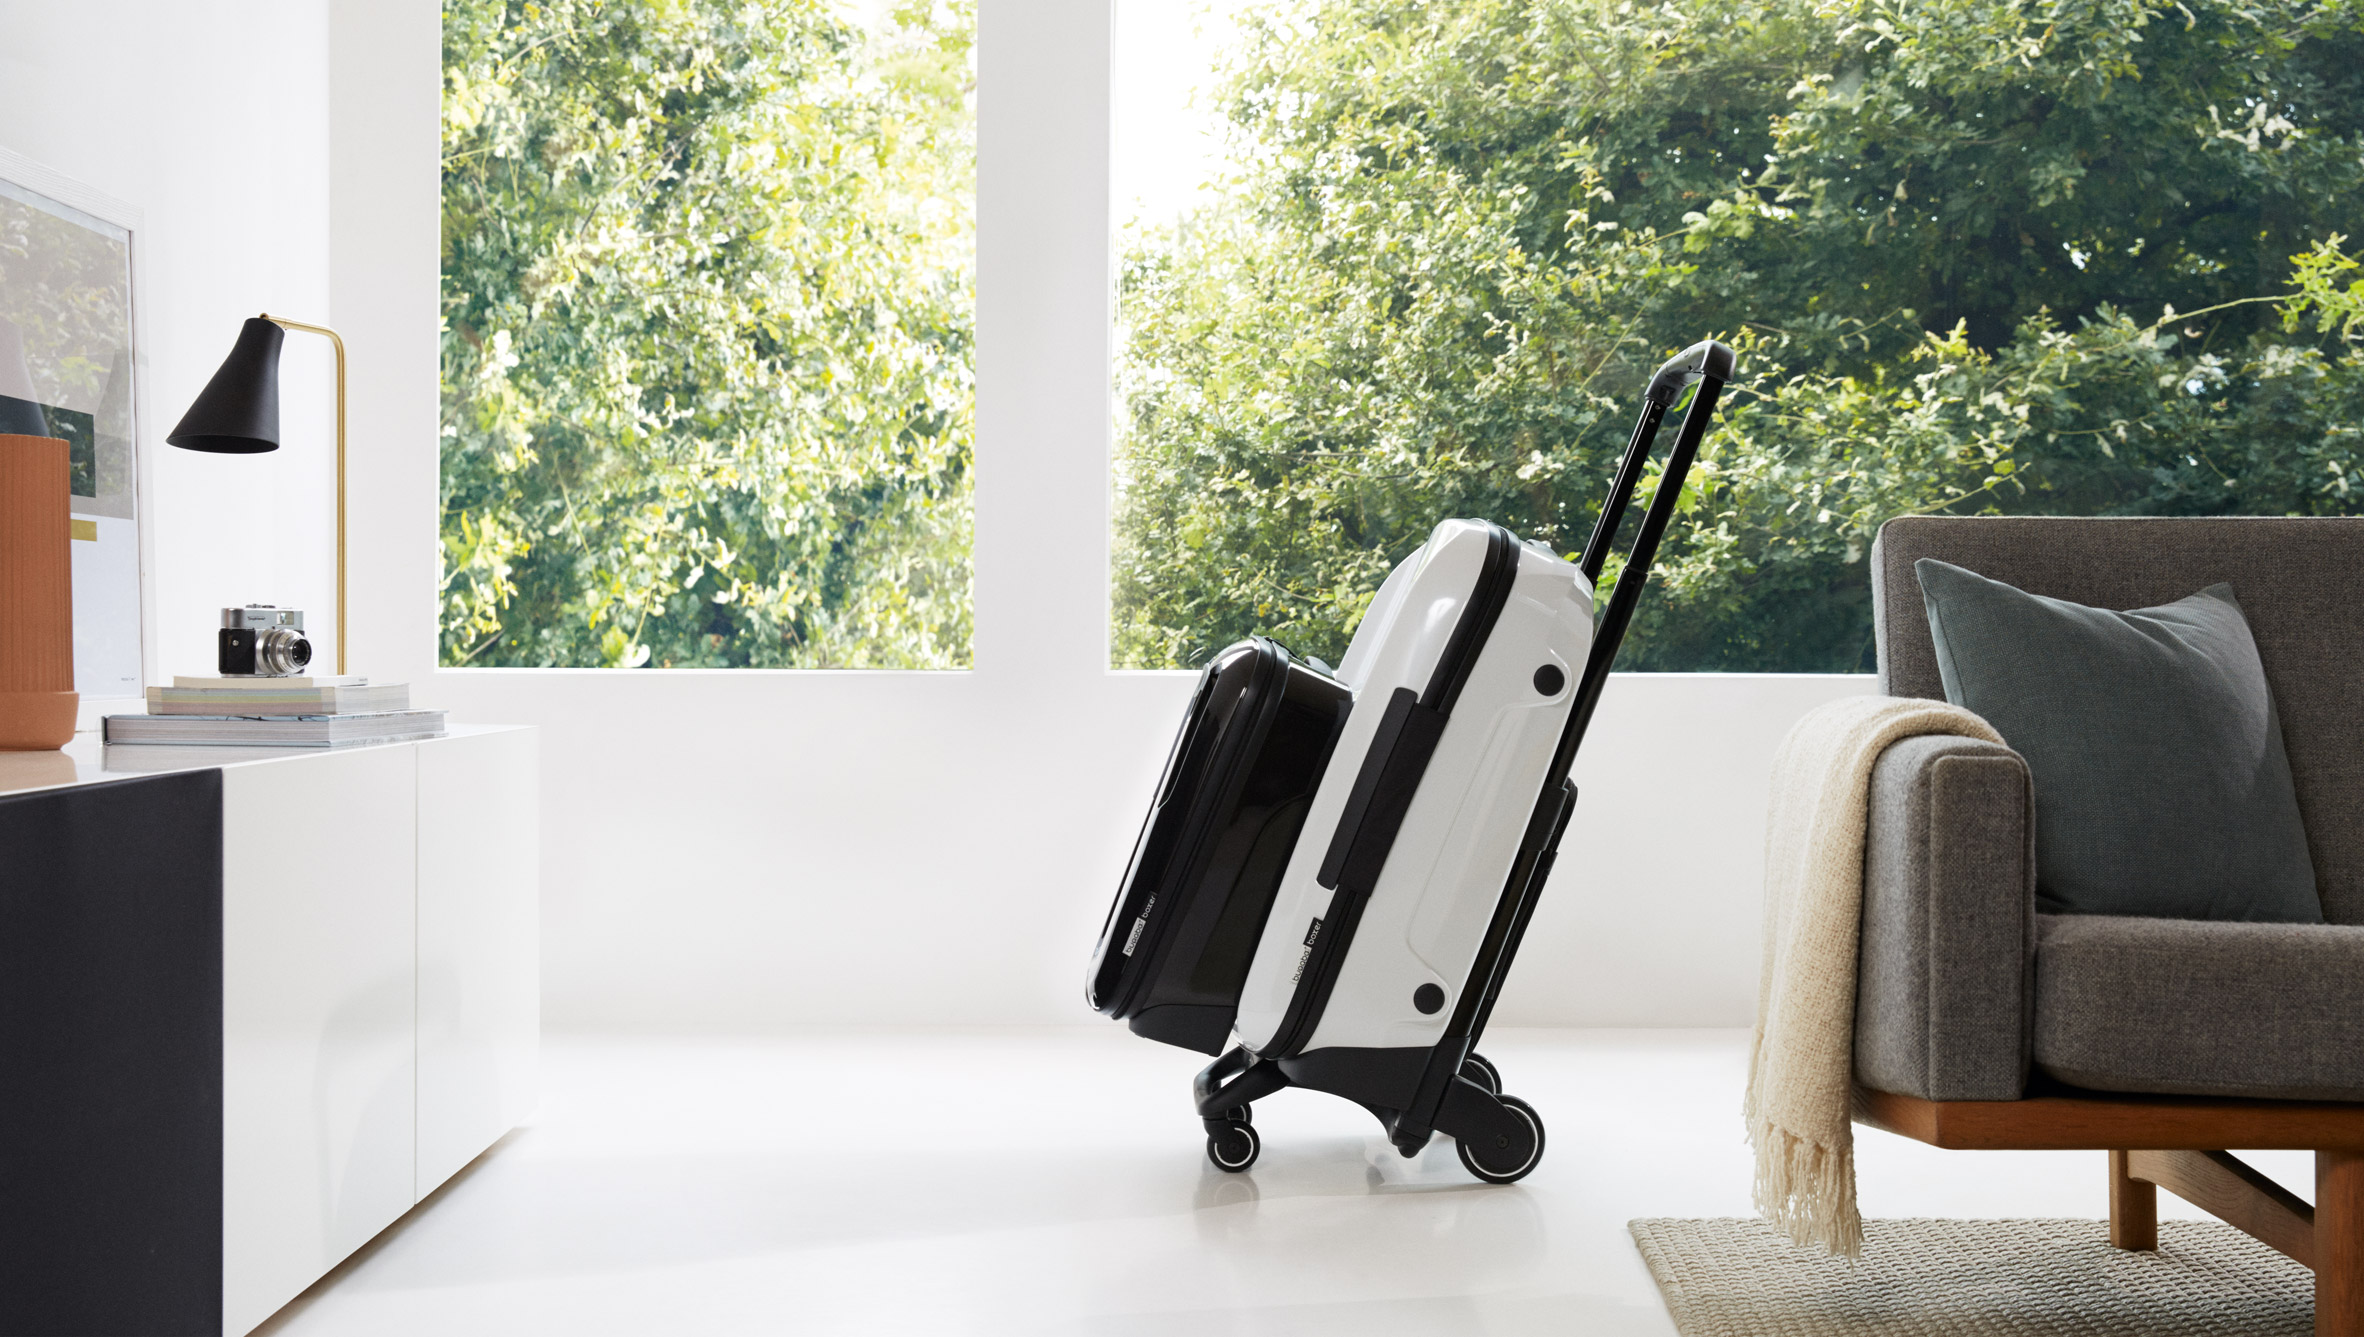 Bugaboo expands beyond strollers with first luggage collection